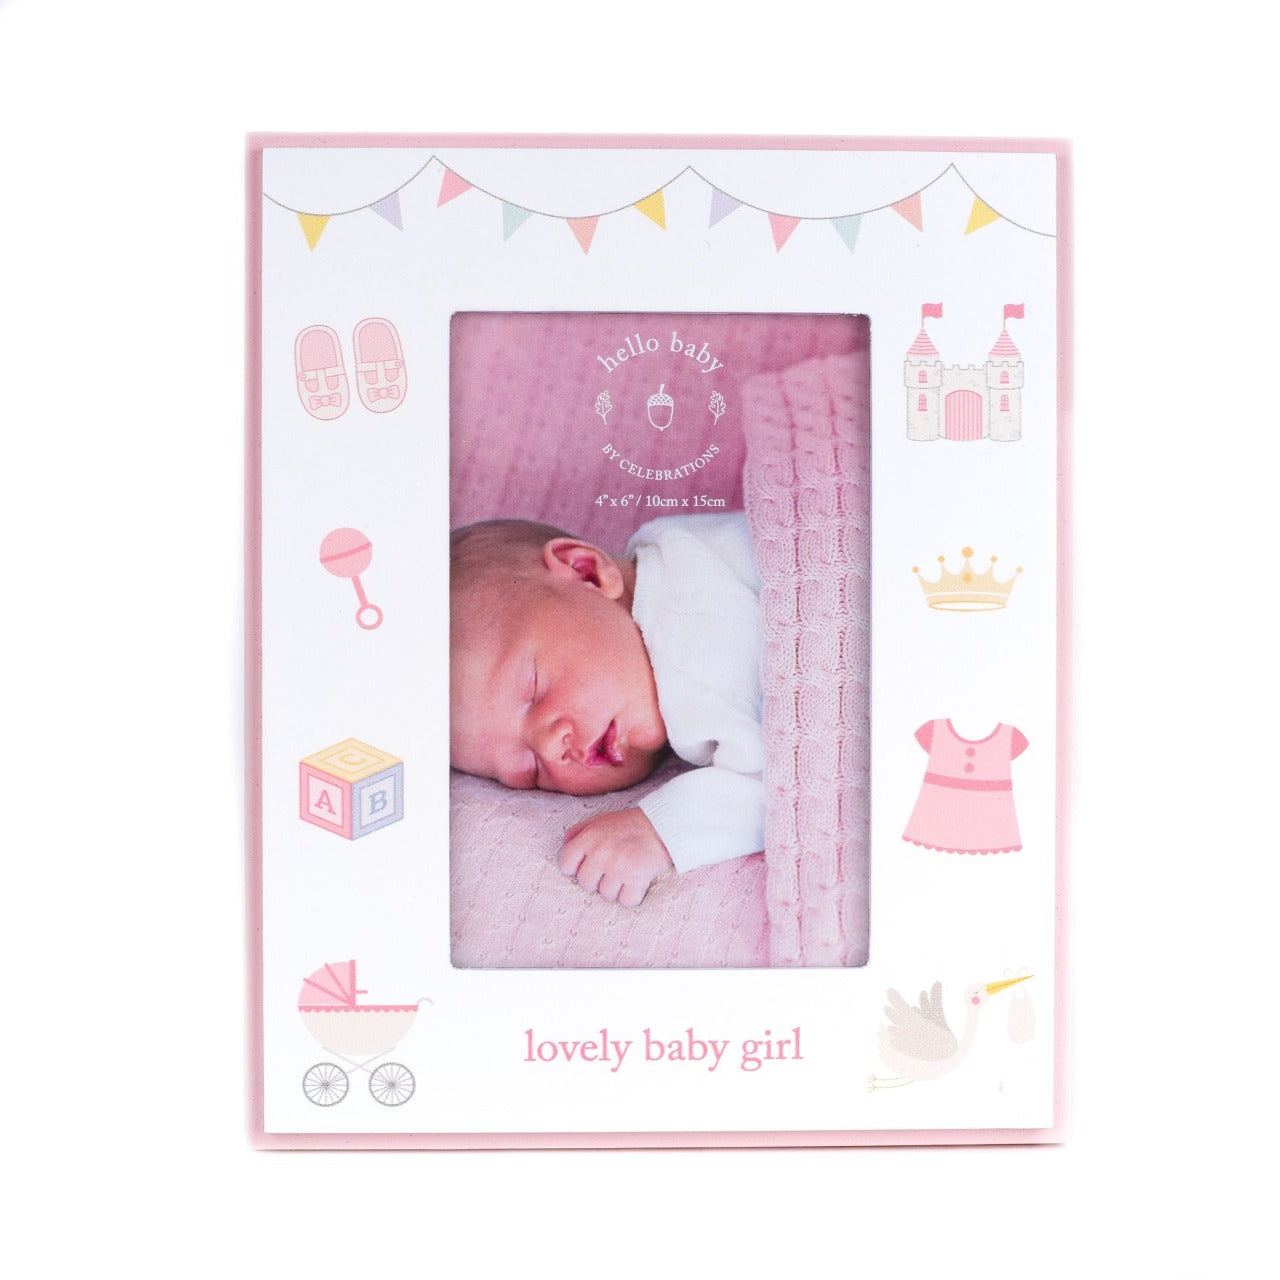 Hello Baby Bunting Photo Frame Baby Girl 4" x 6"  Give a precious photo of your little princess the perfect place to shine with this adroable frame. From the Hello Baby collection by CELEBRATIONS® - gifts to celebrate a perfect new arrival.